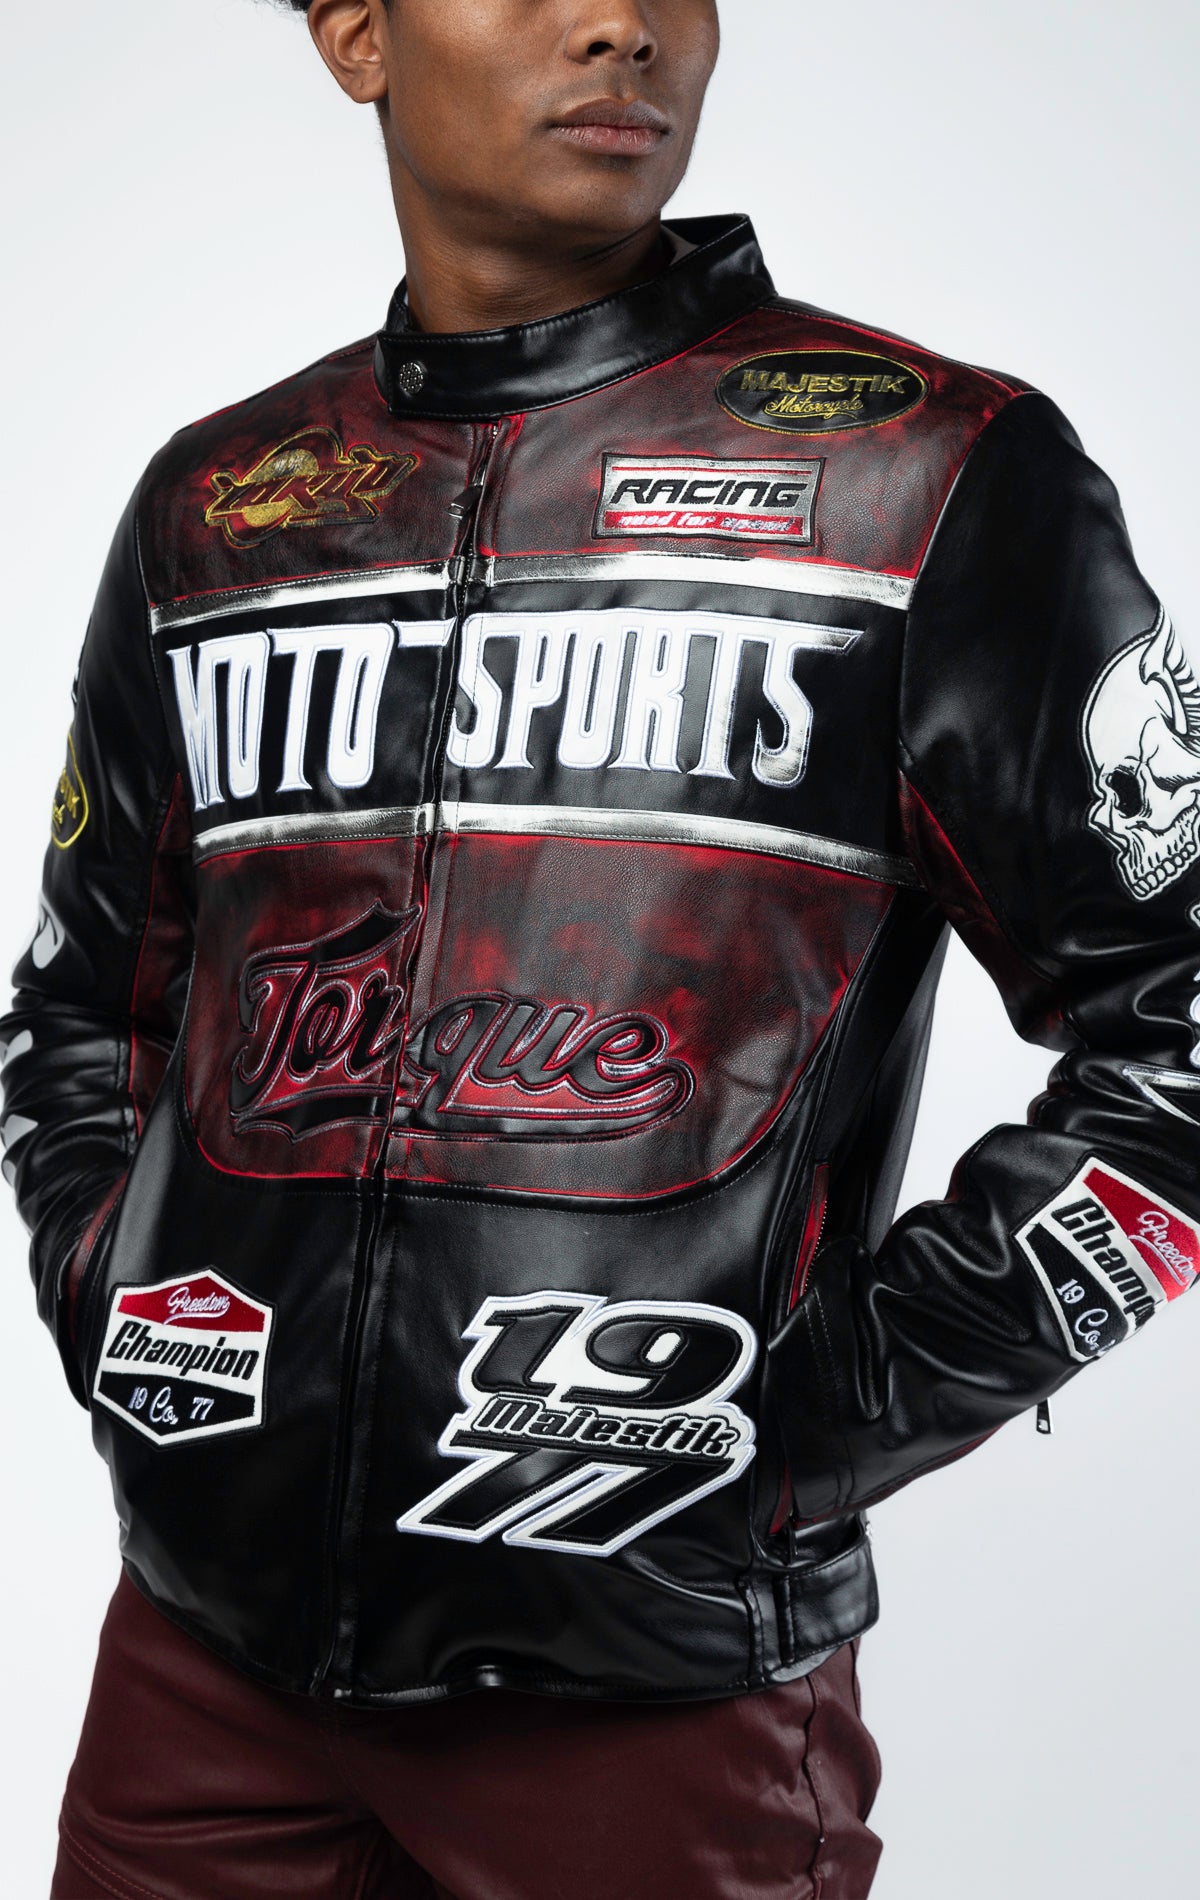 Black motor sport racing jacket with  snap-button collar, full zip-up closure, multi-patch and embroidered details, zippered sleeves and pockets, and elasticized ribbed collar, cuffs, and waist. The interior includes a hanger loop, welt pocket, and faux leather finish for added convenience.